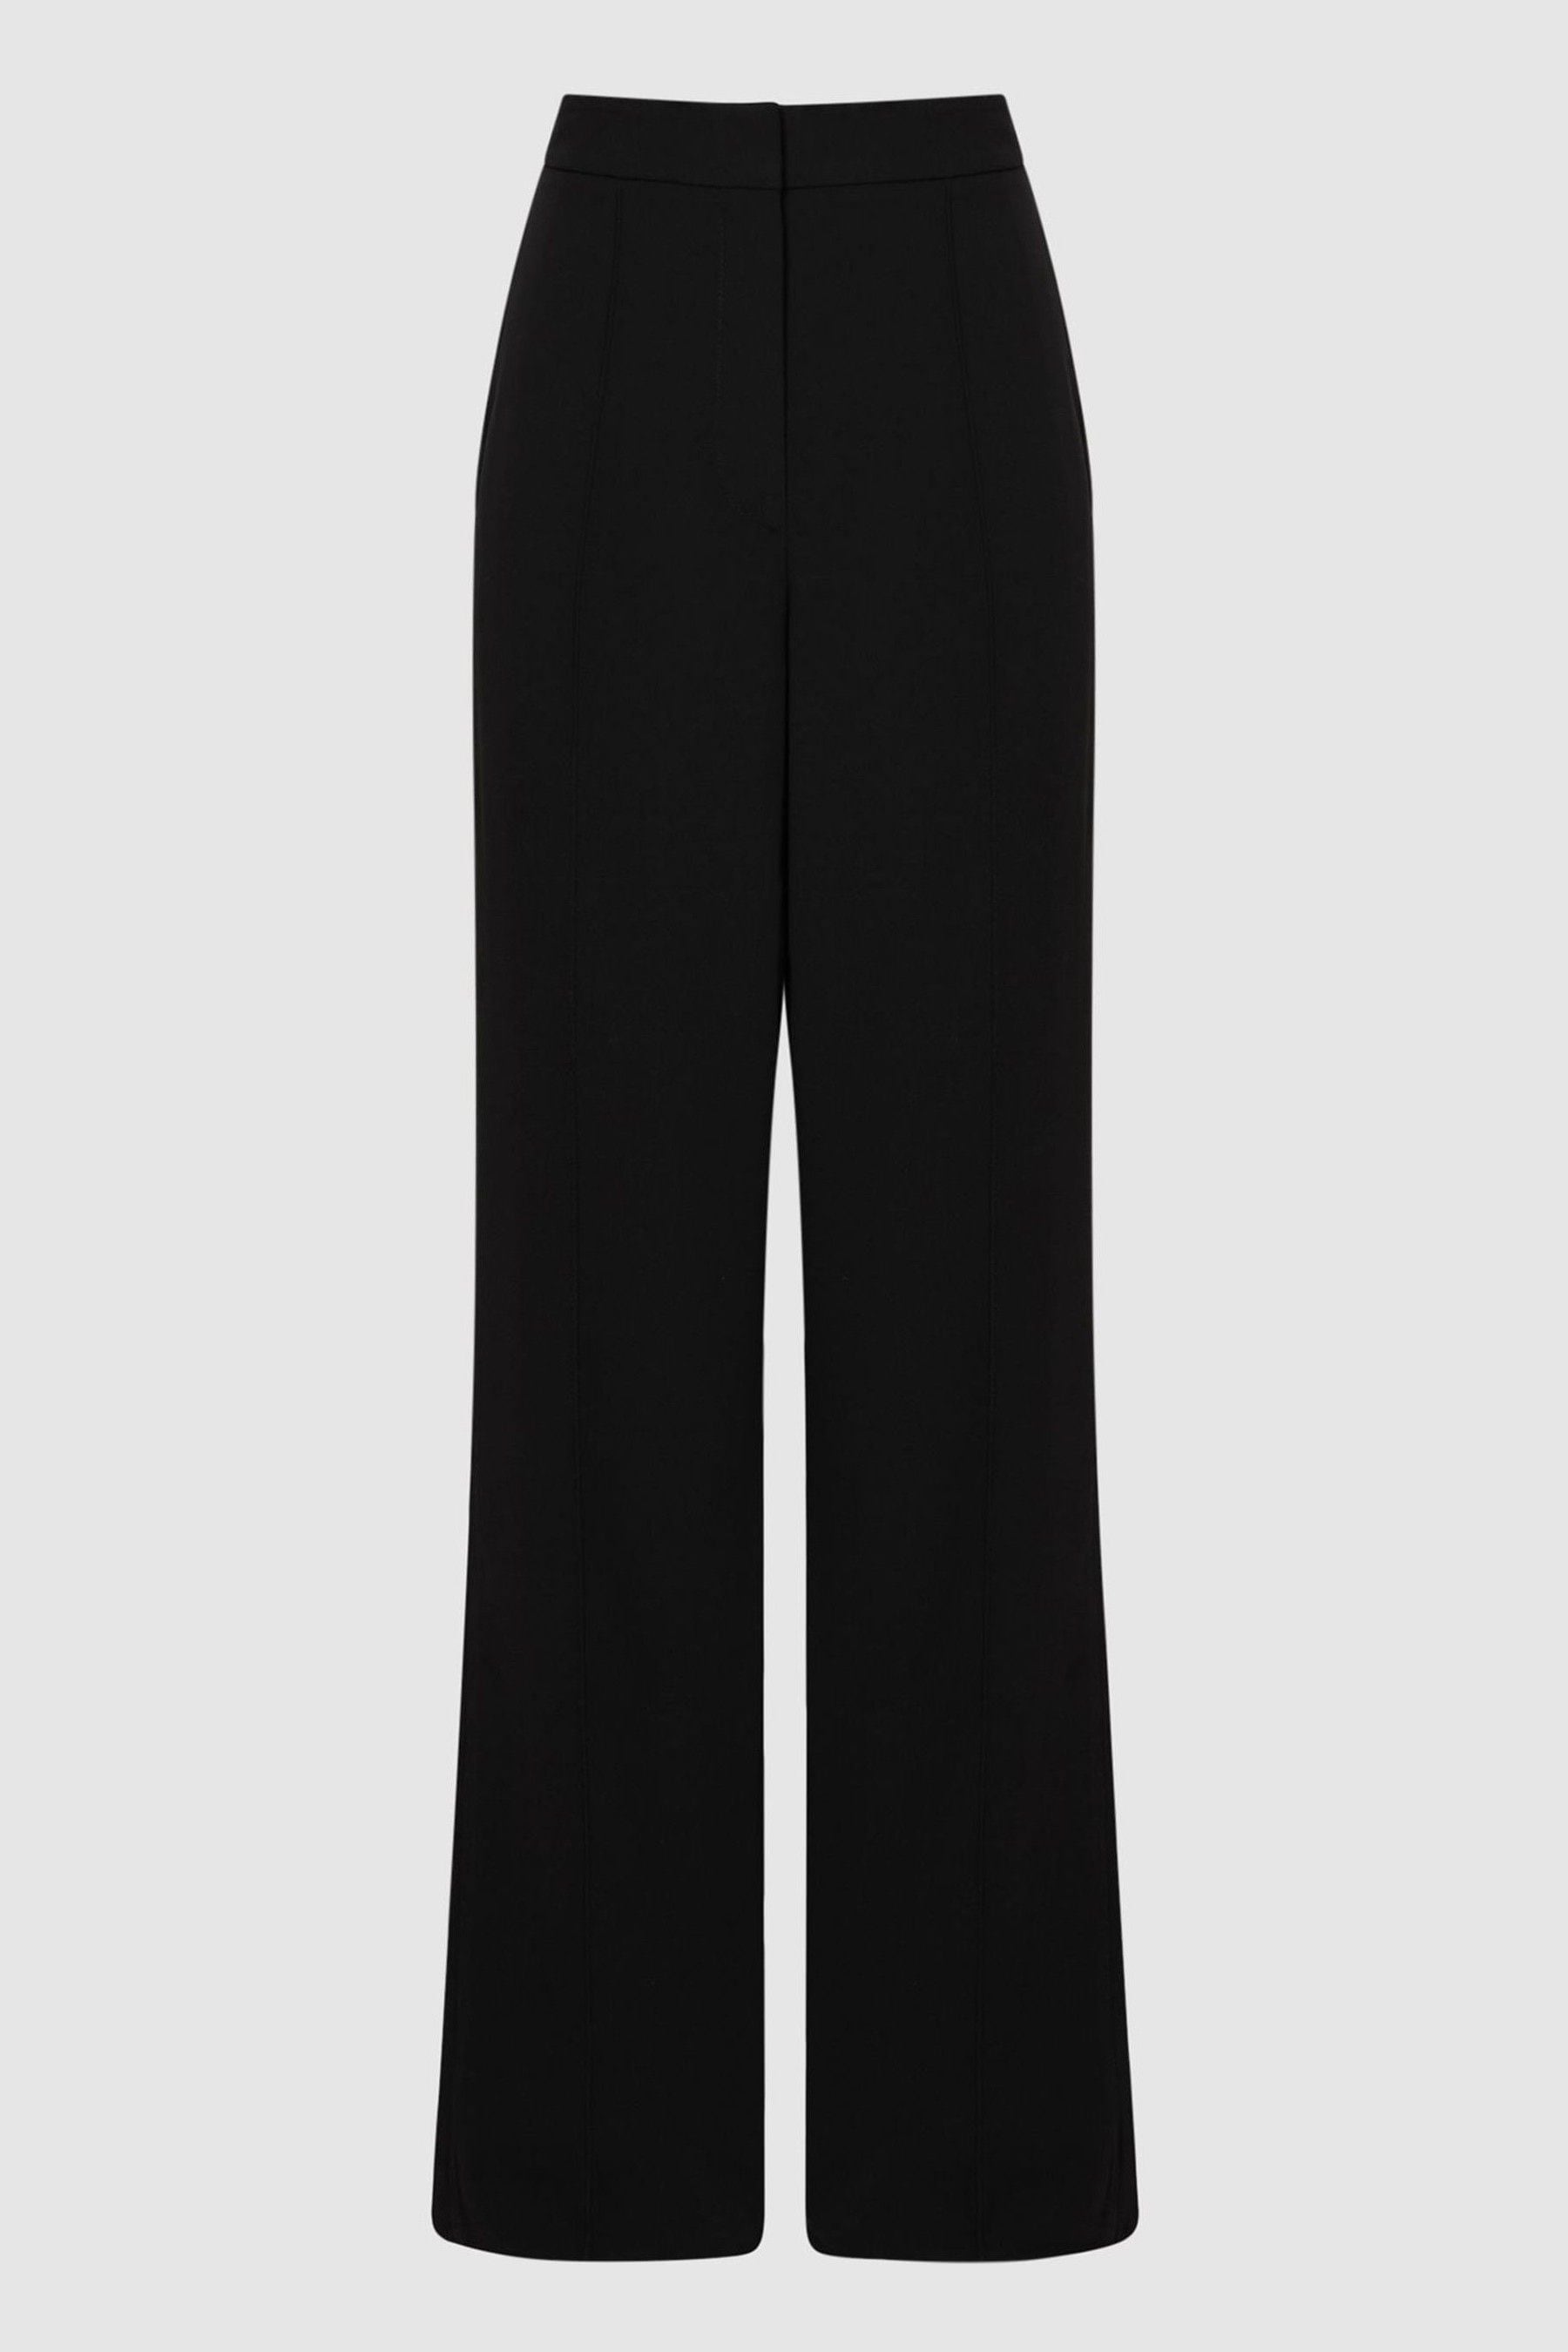 Buy Reiss Aleah Pull On Trousers from the Next UK online shop